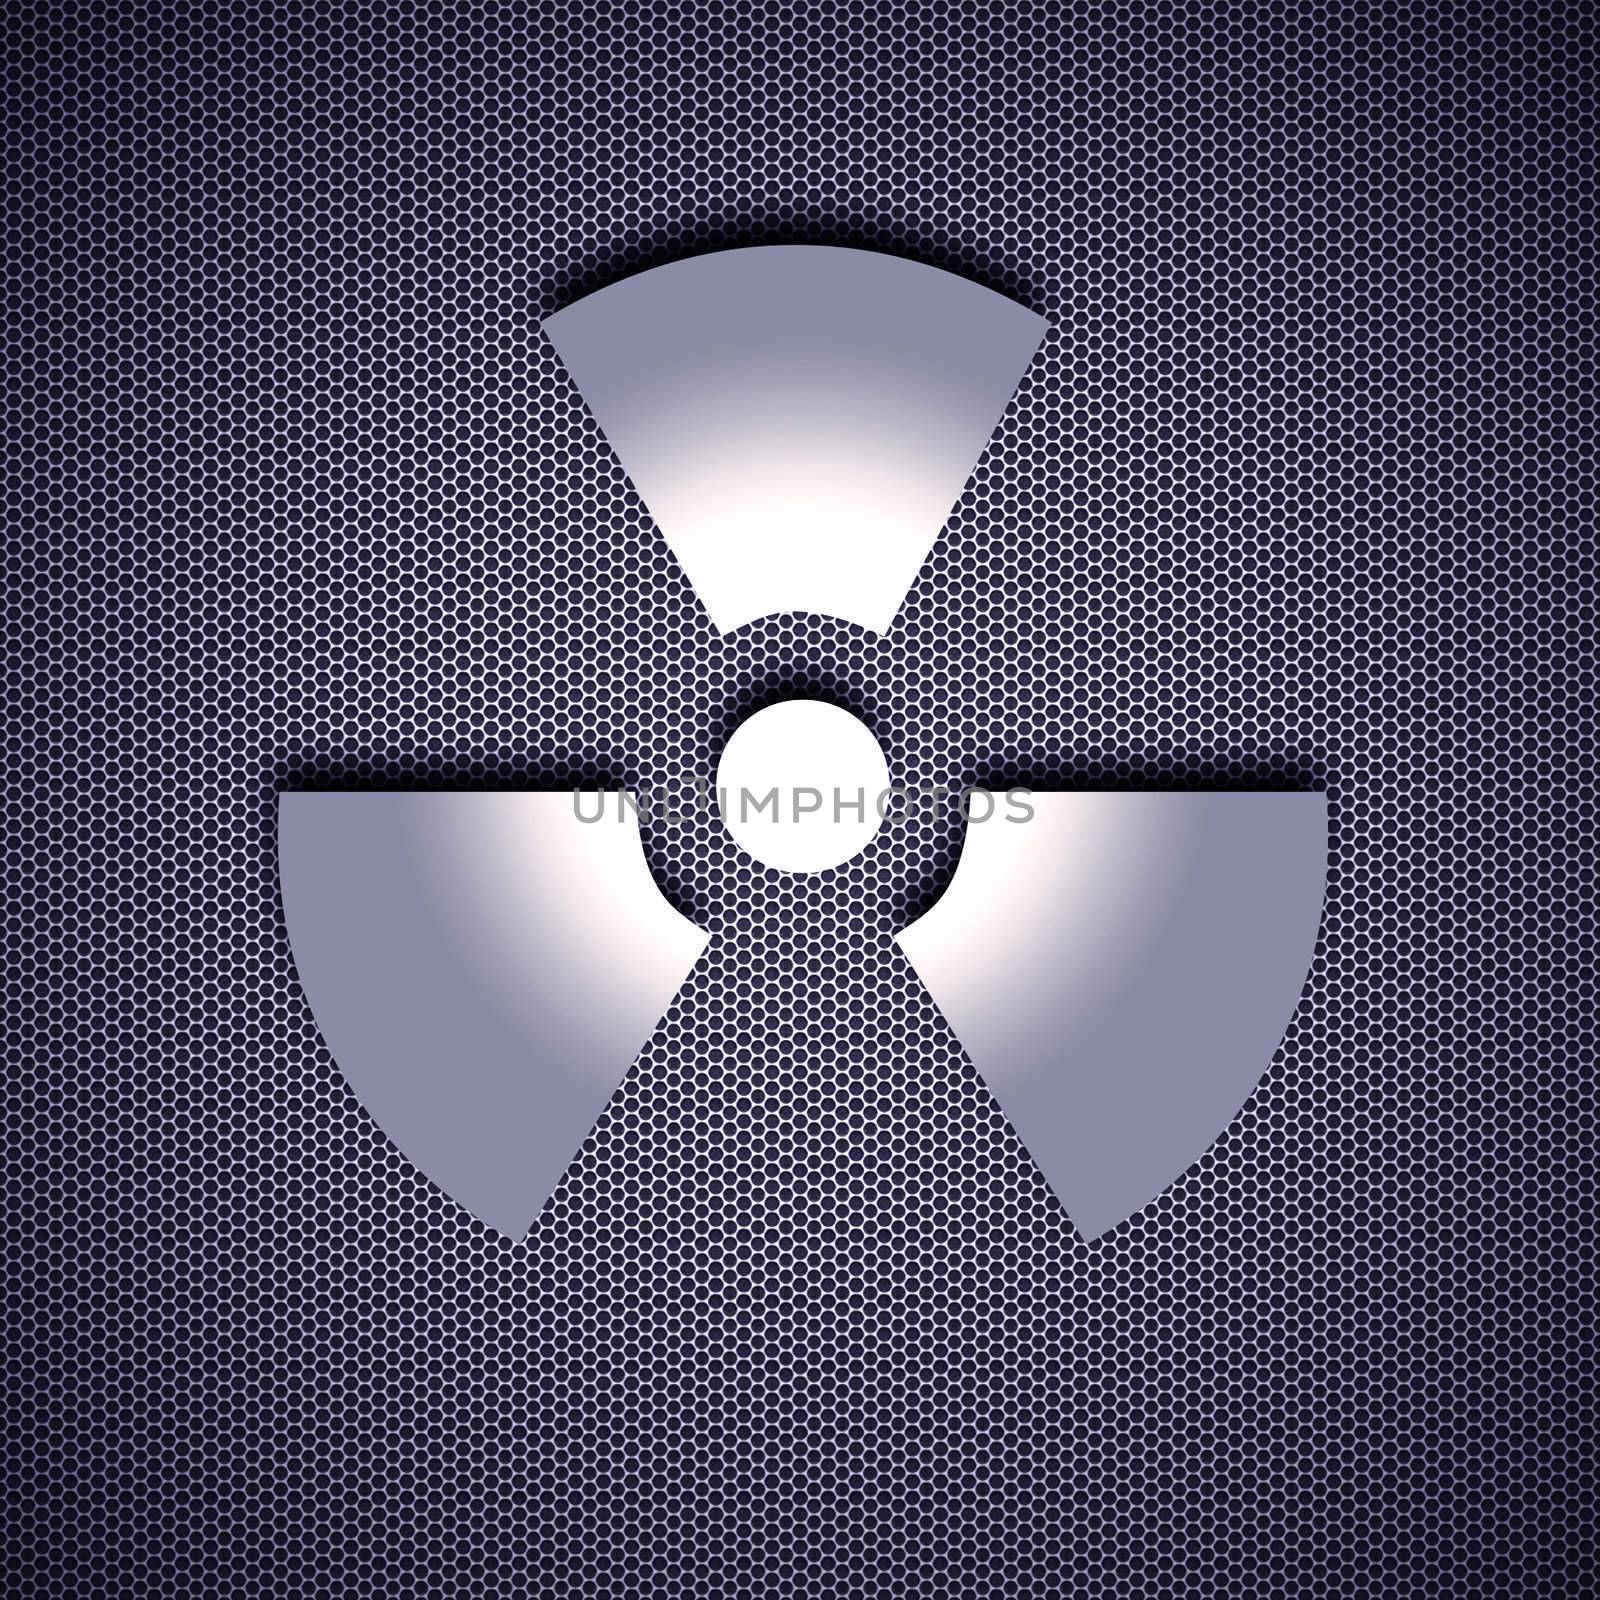 Atomic symbol with 3d effect, symbol isolated on metal background. Steel background.